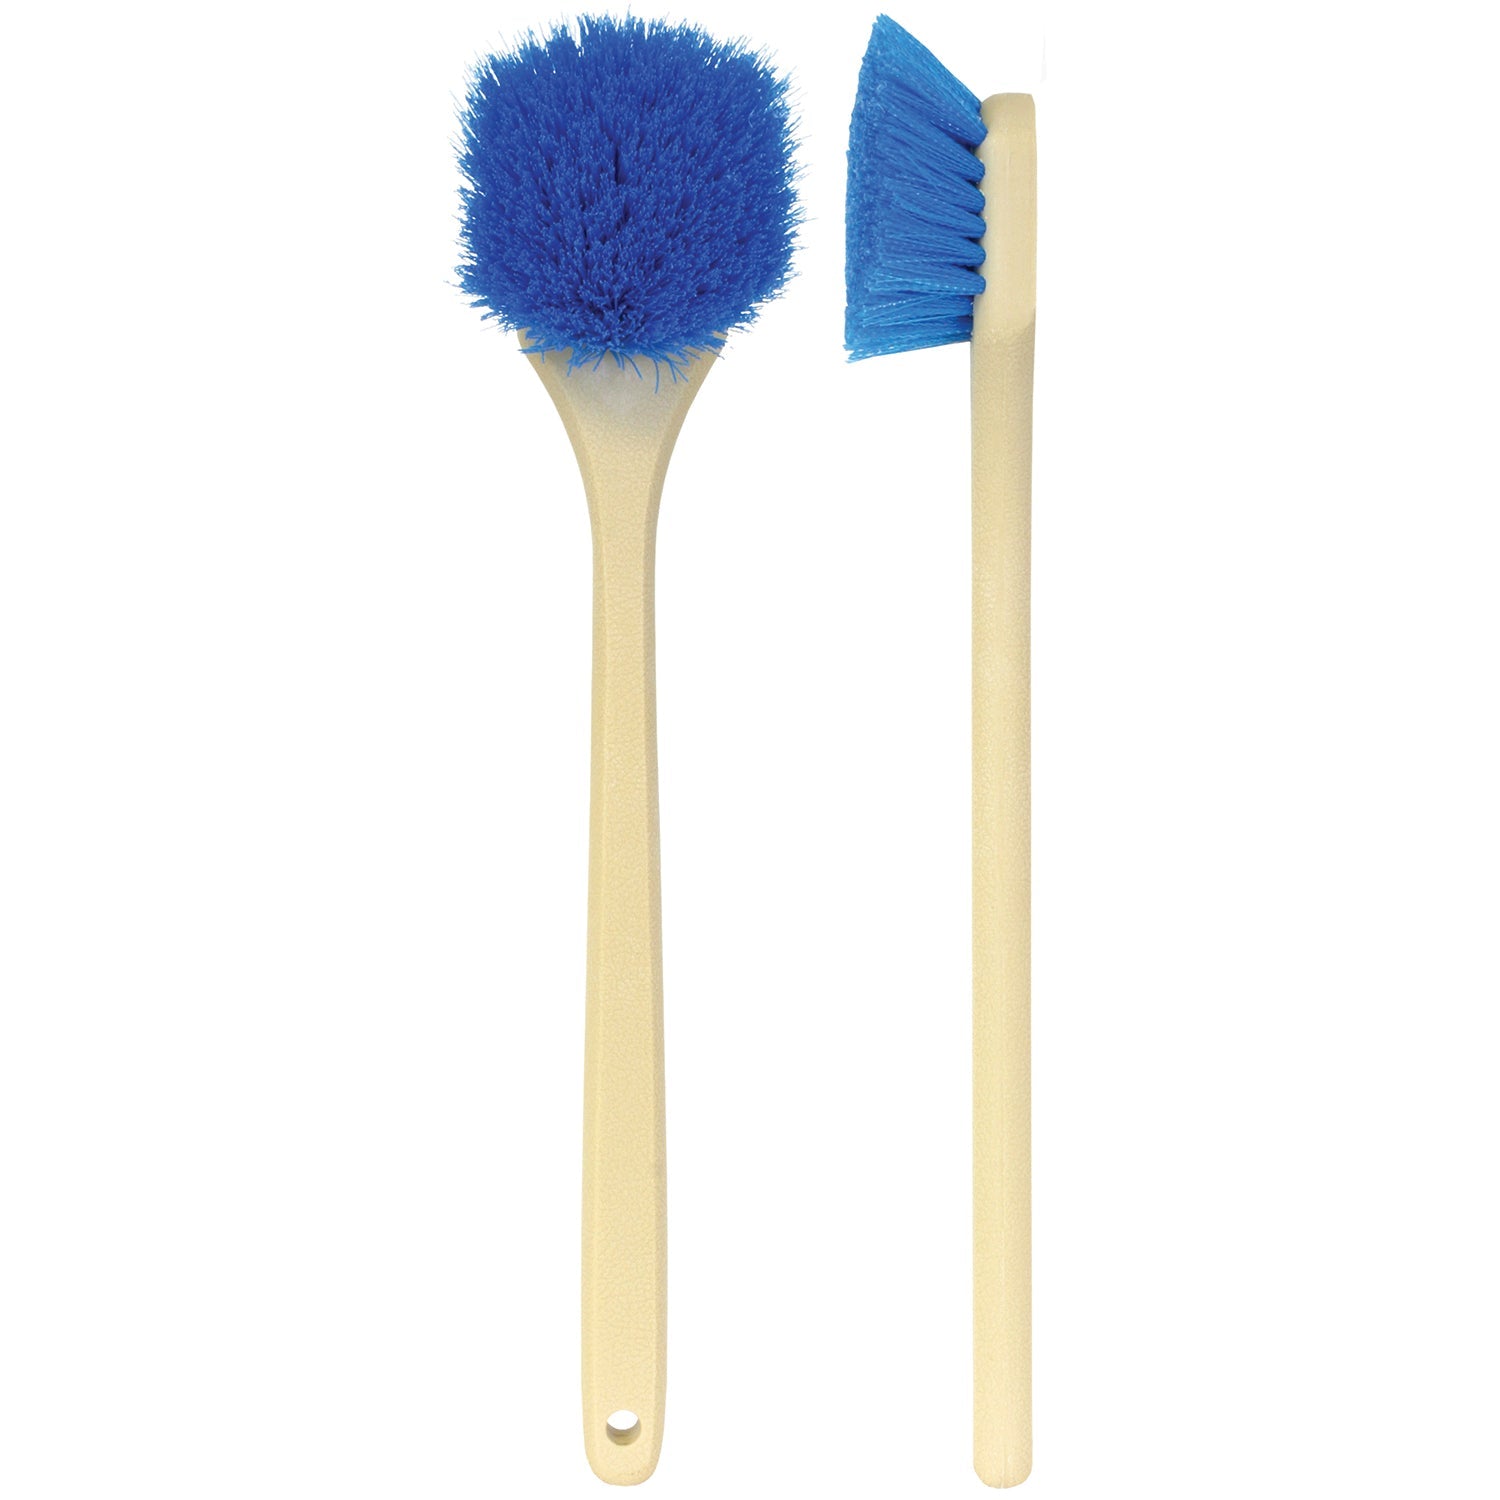 S.M. Arnold 85-626 Heavy Duty Interior and Upholstery Brush